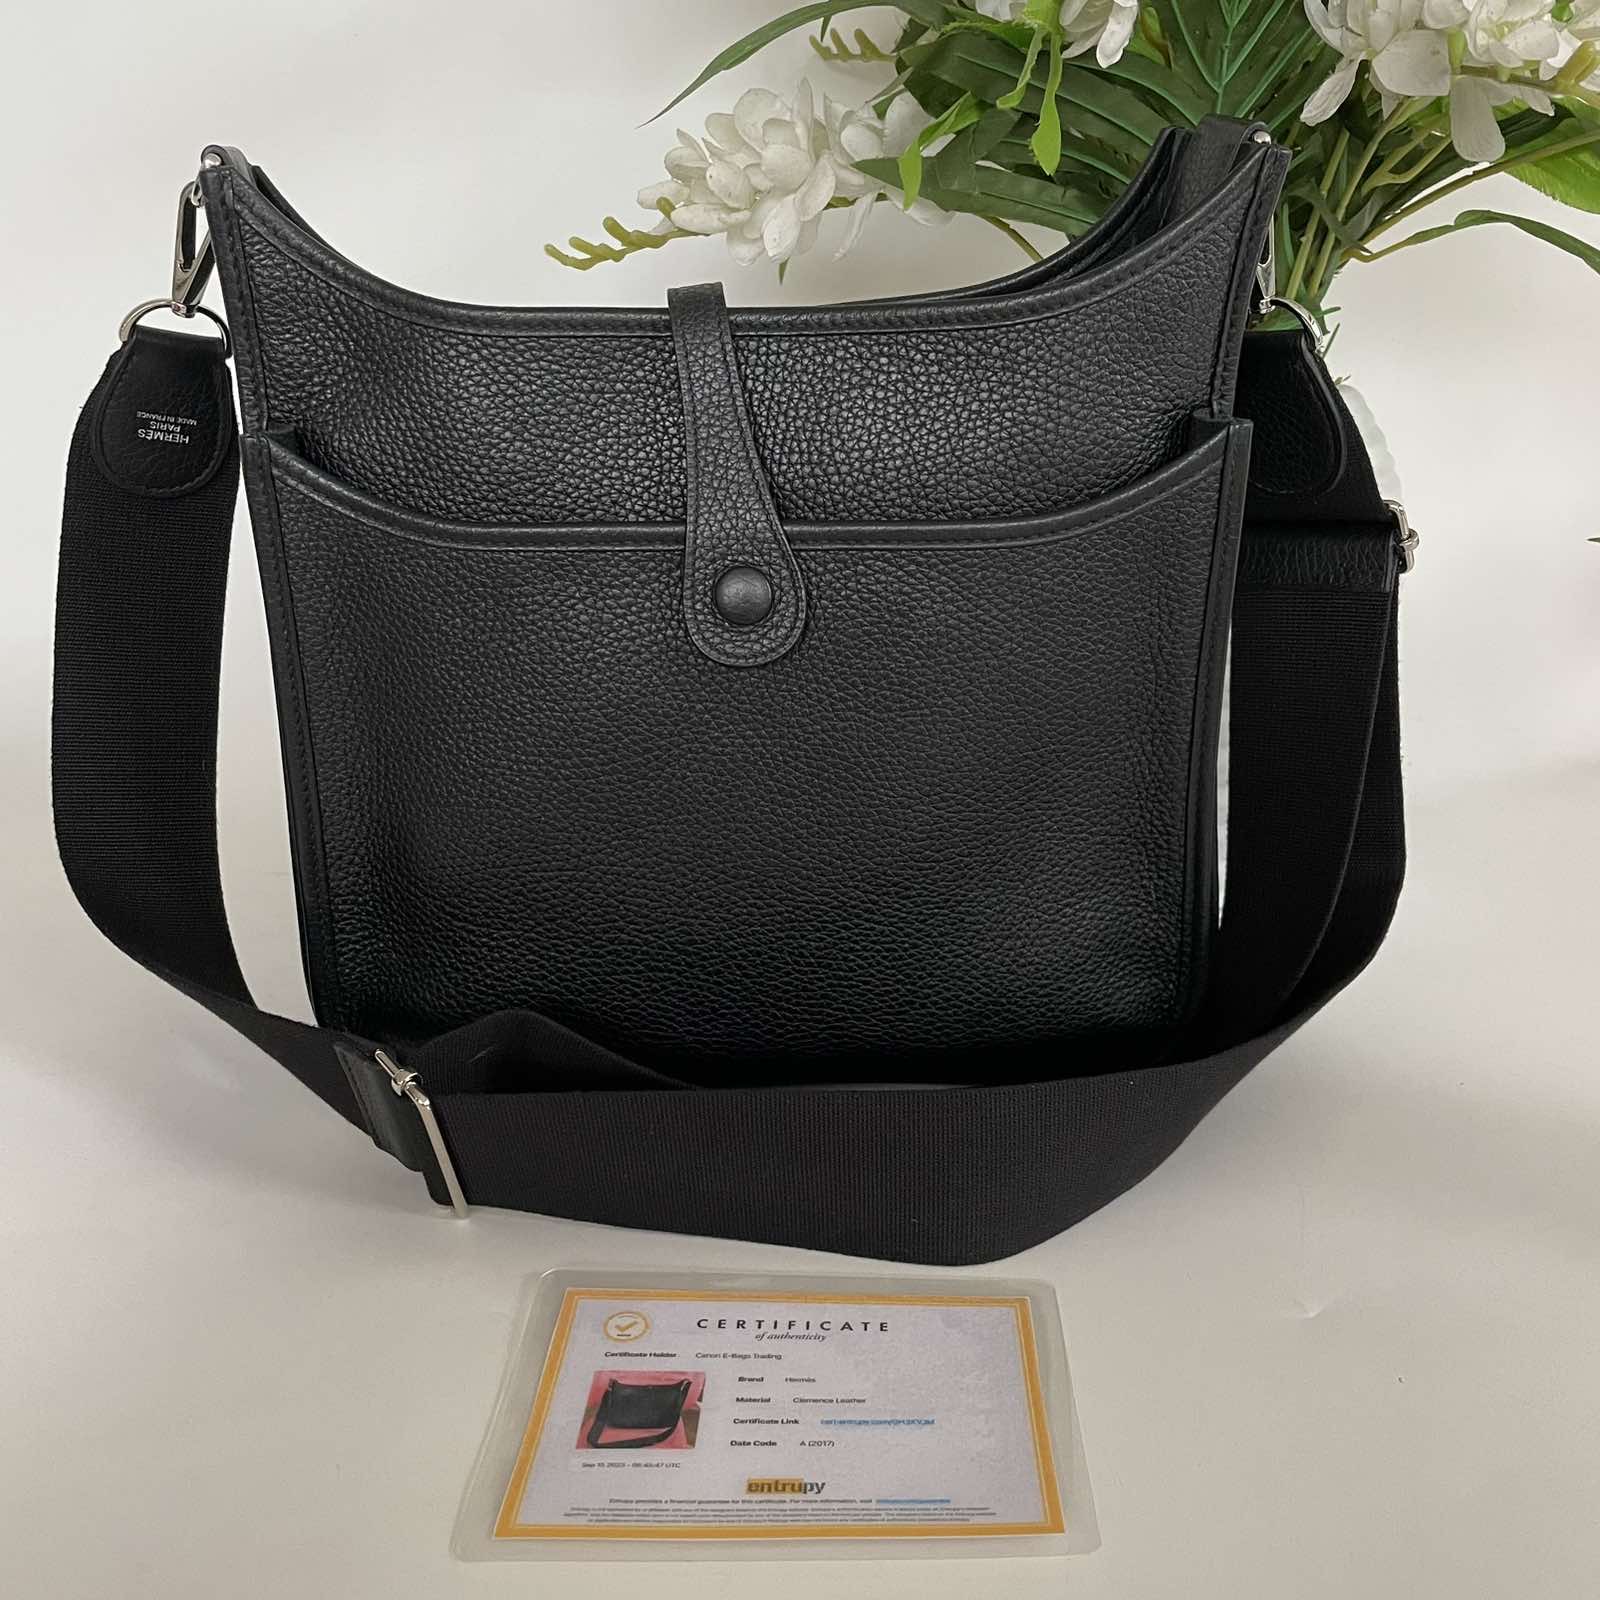 Hermes Evelyne Black PM 3 Clemence Leather Palladium Hardware. Made in  France. With certificate of authenticity from ENTRUPY ❤️